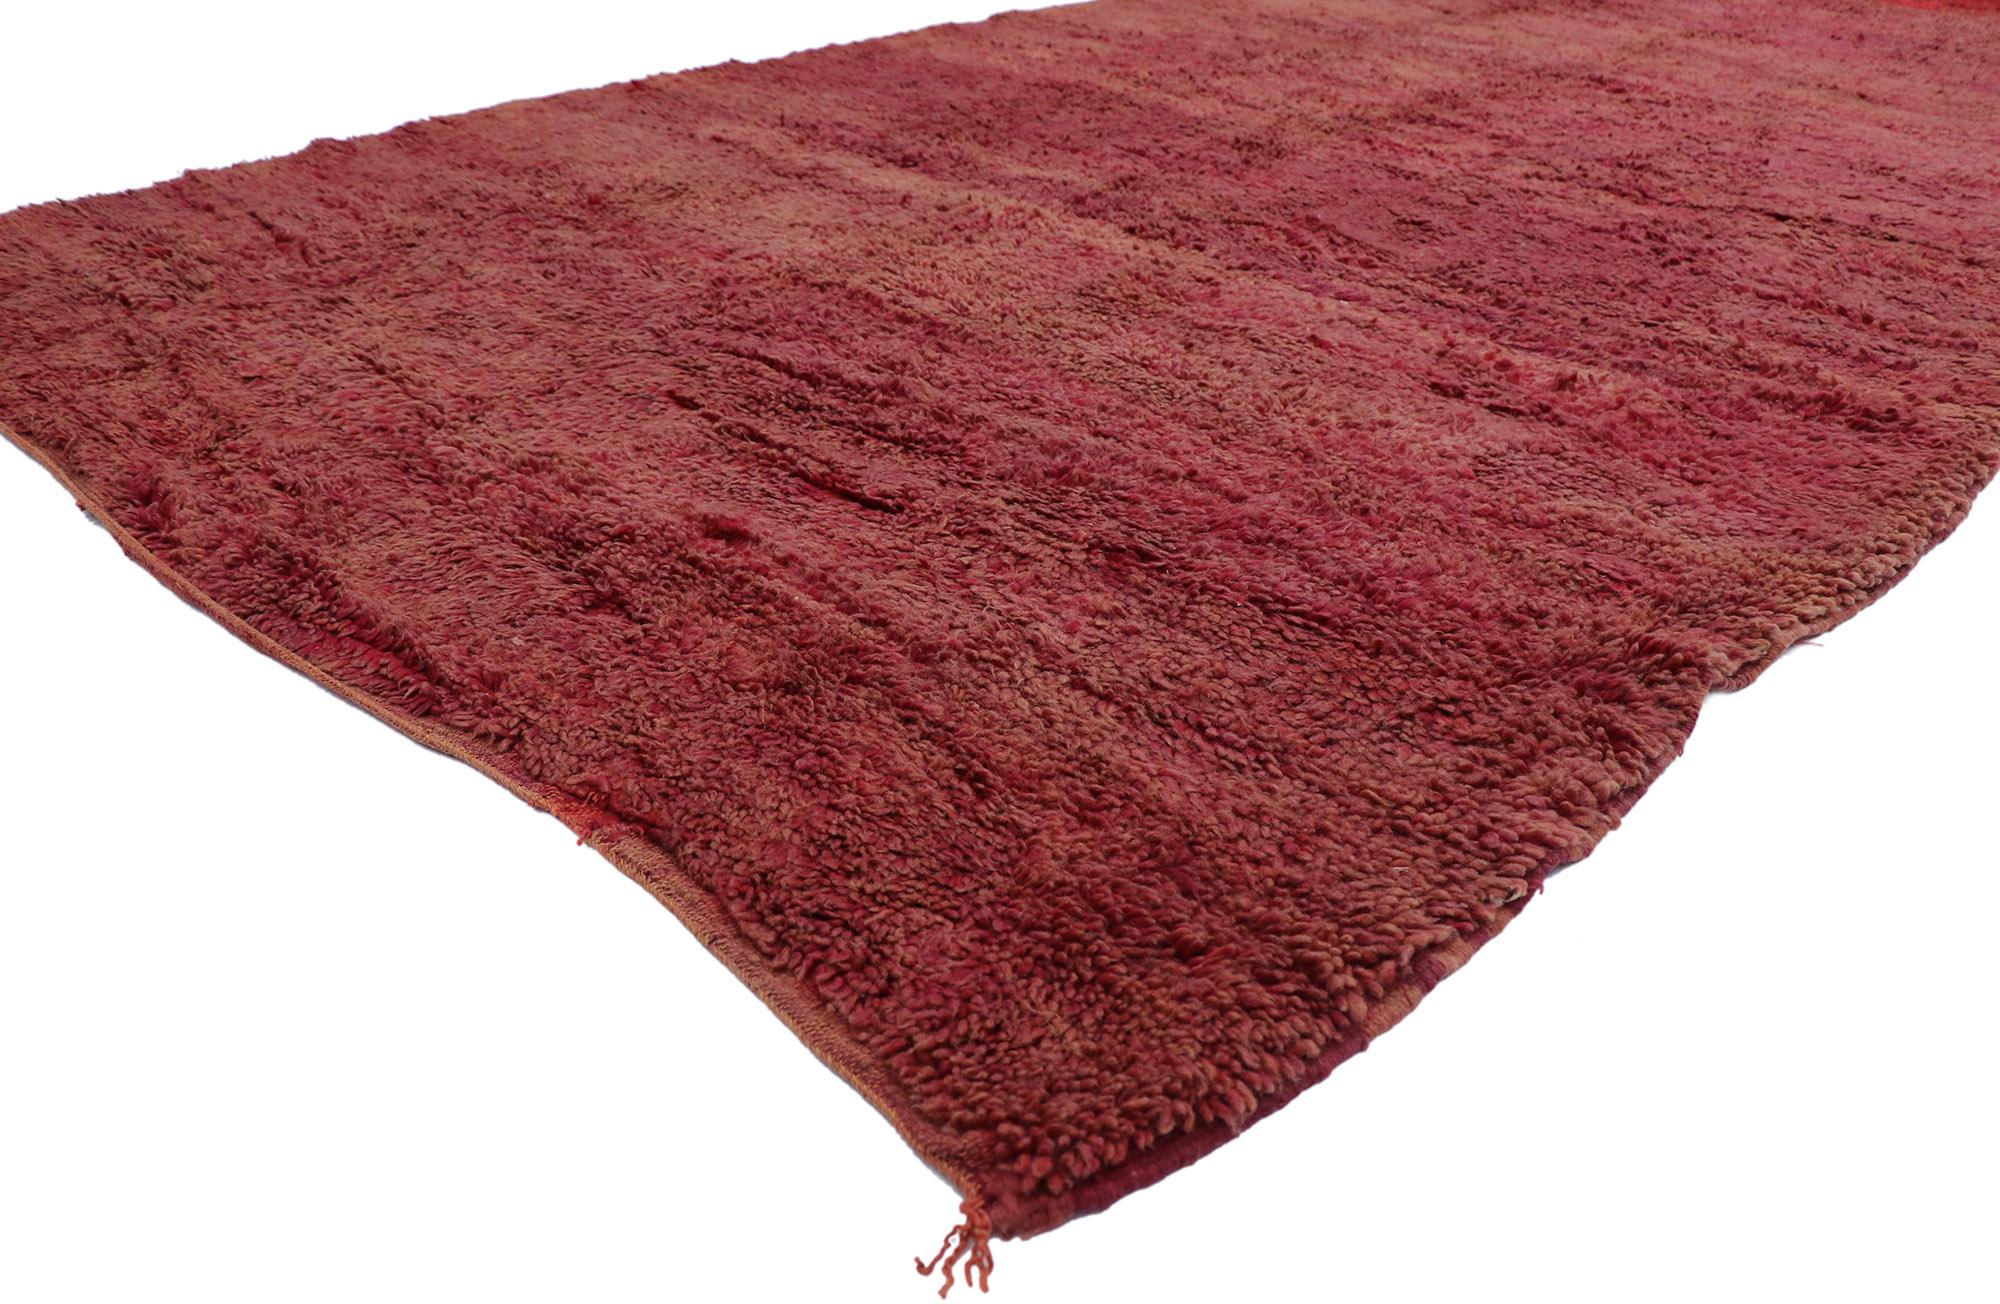 21271 vintage Berber Beni Mrirt Moroccan rug with Bohemian style 06'08 x 12'09. With its simplicity, plush pile and Bohemian vibes, this hand knotted wool vintage Berber Beni Mrirt Moroccan rug is a captivating vision of woven beauty. Imbued with